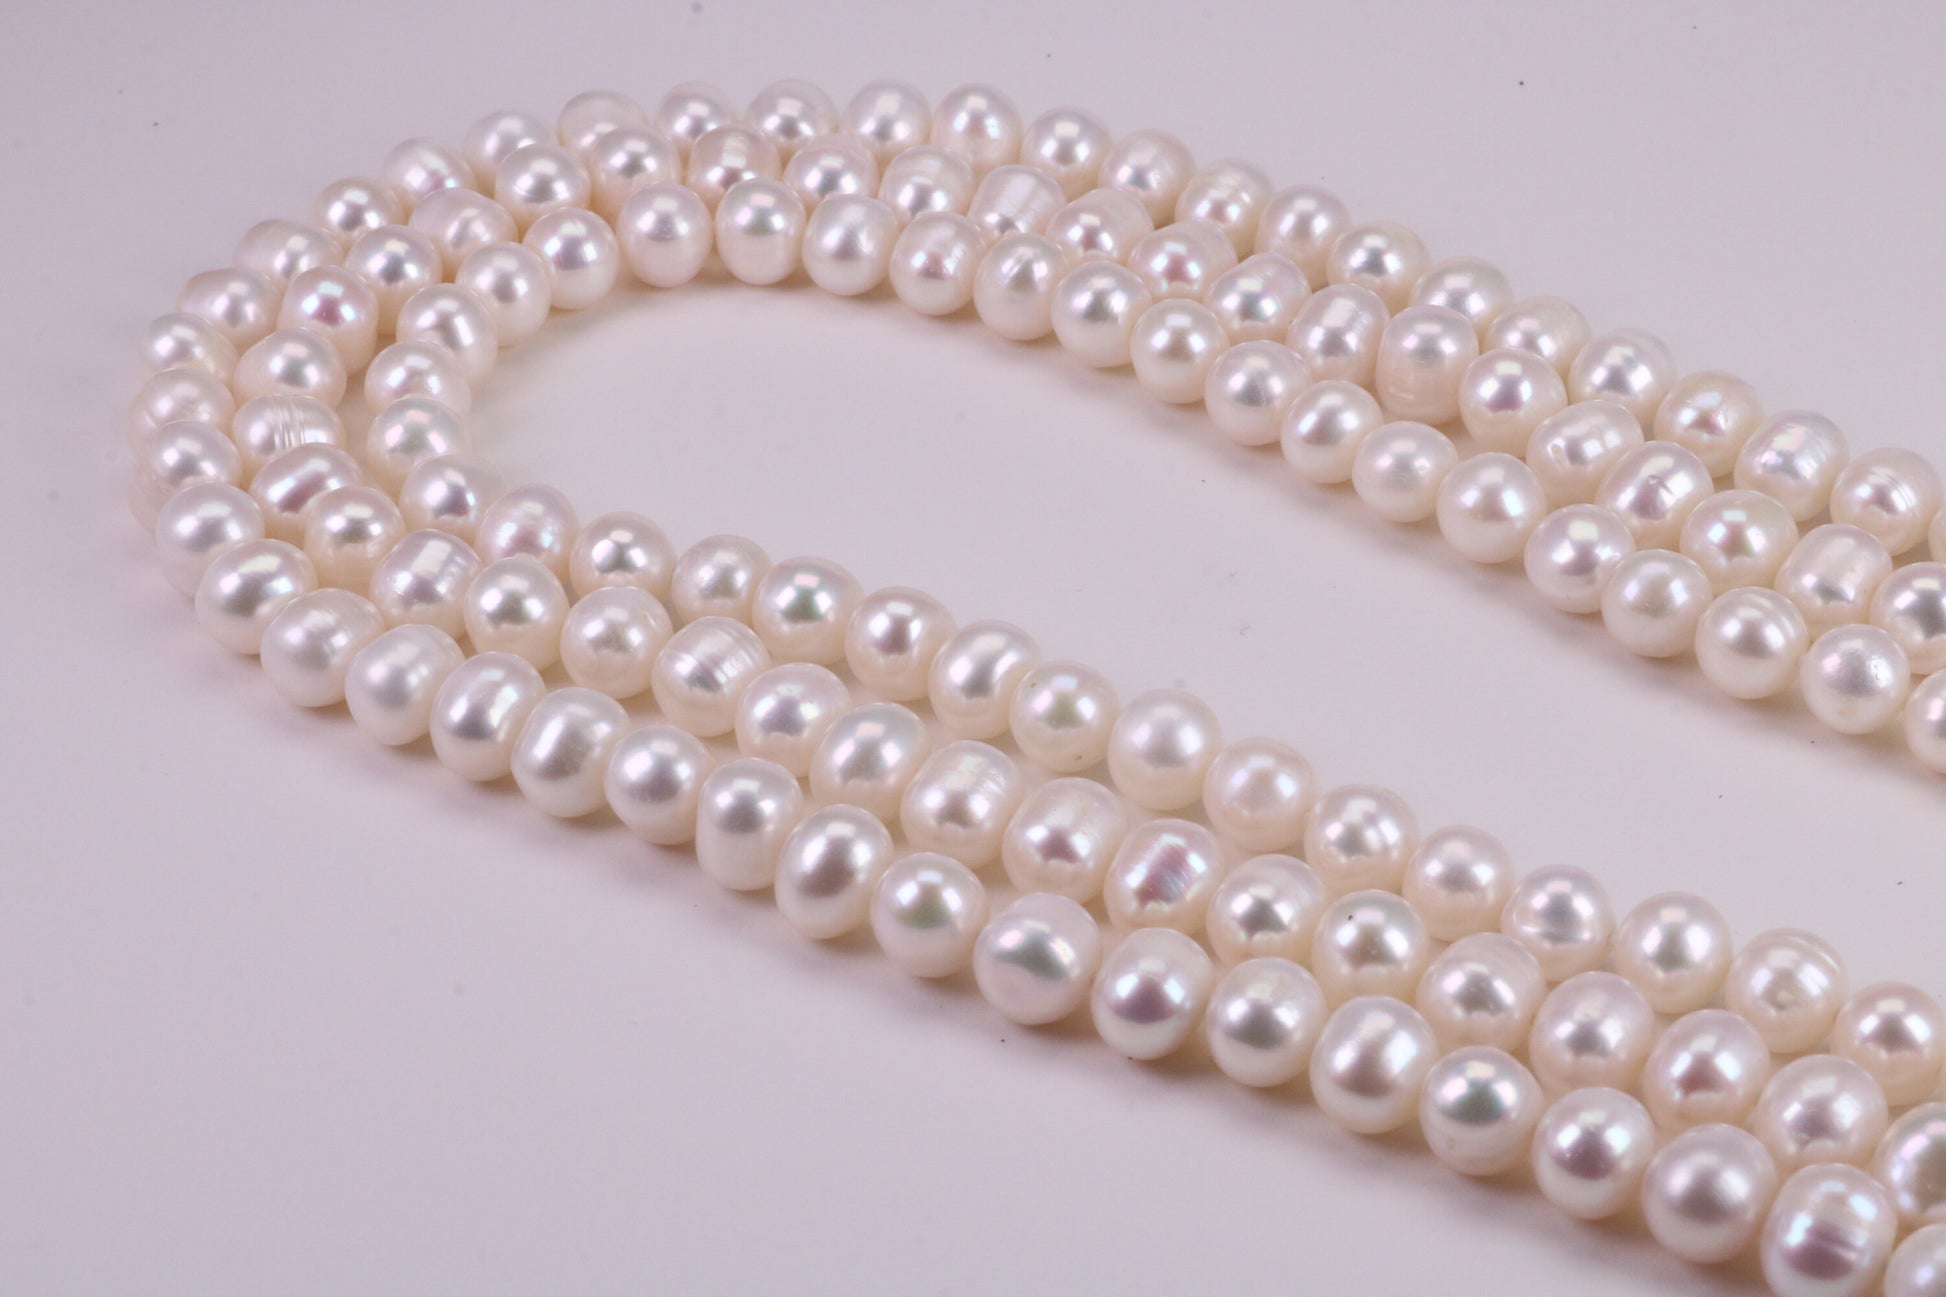 Three Strand Natural 7 mm Round Pearl Necklace set in Silver, Three Strands Measures 16, 18 and 20 inches Long